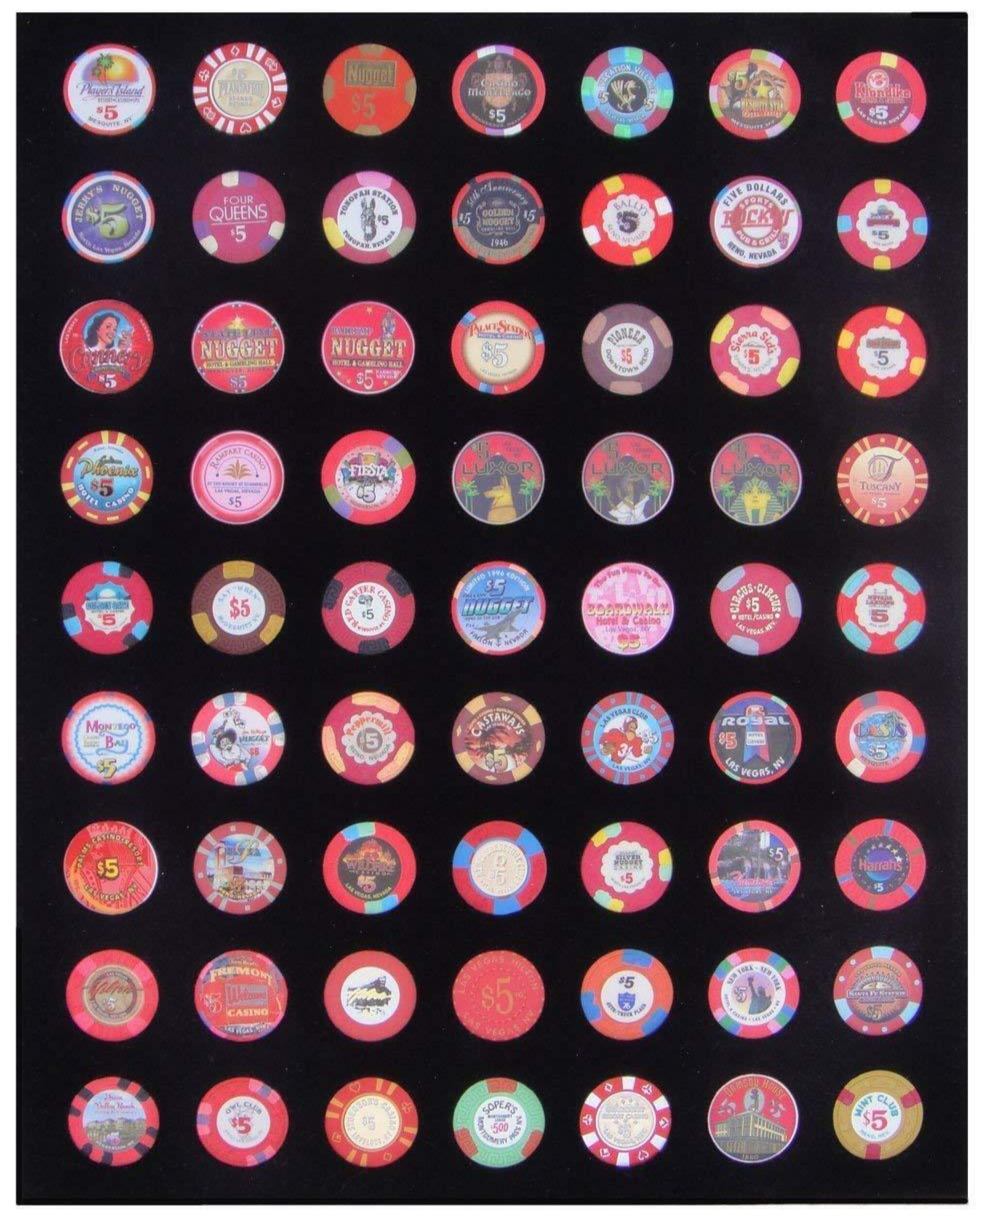 16x20 Black Display Insert For 63 Casino Poker Chips (not Included)